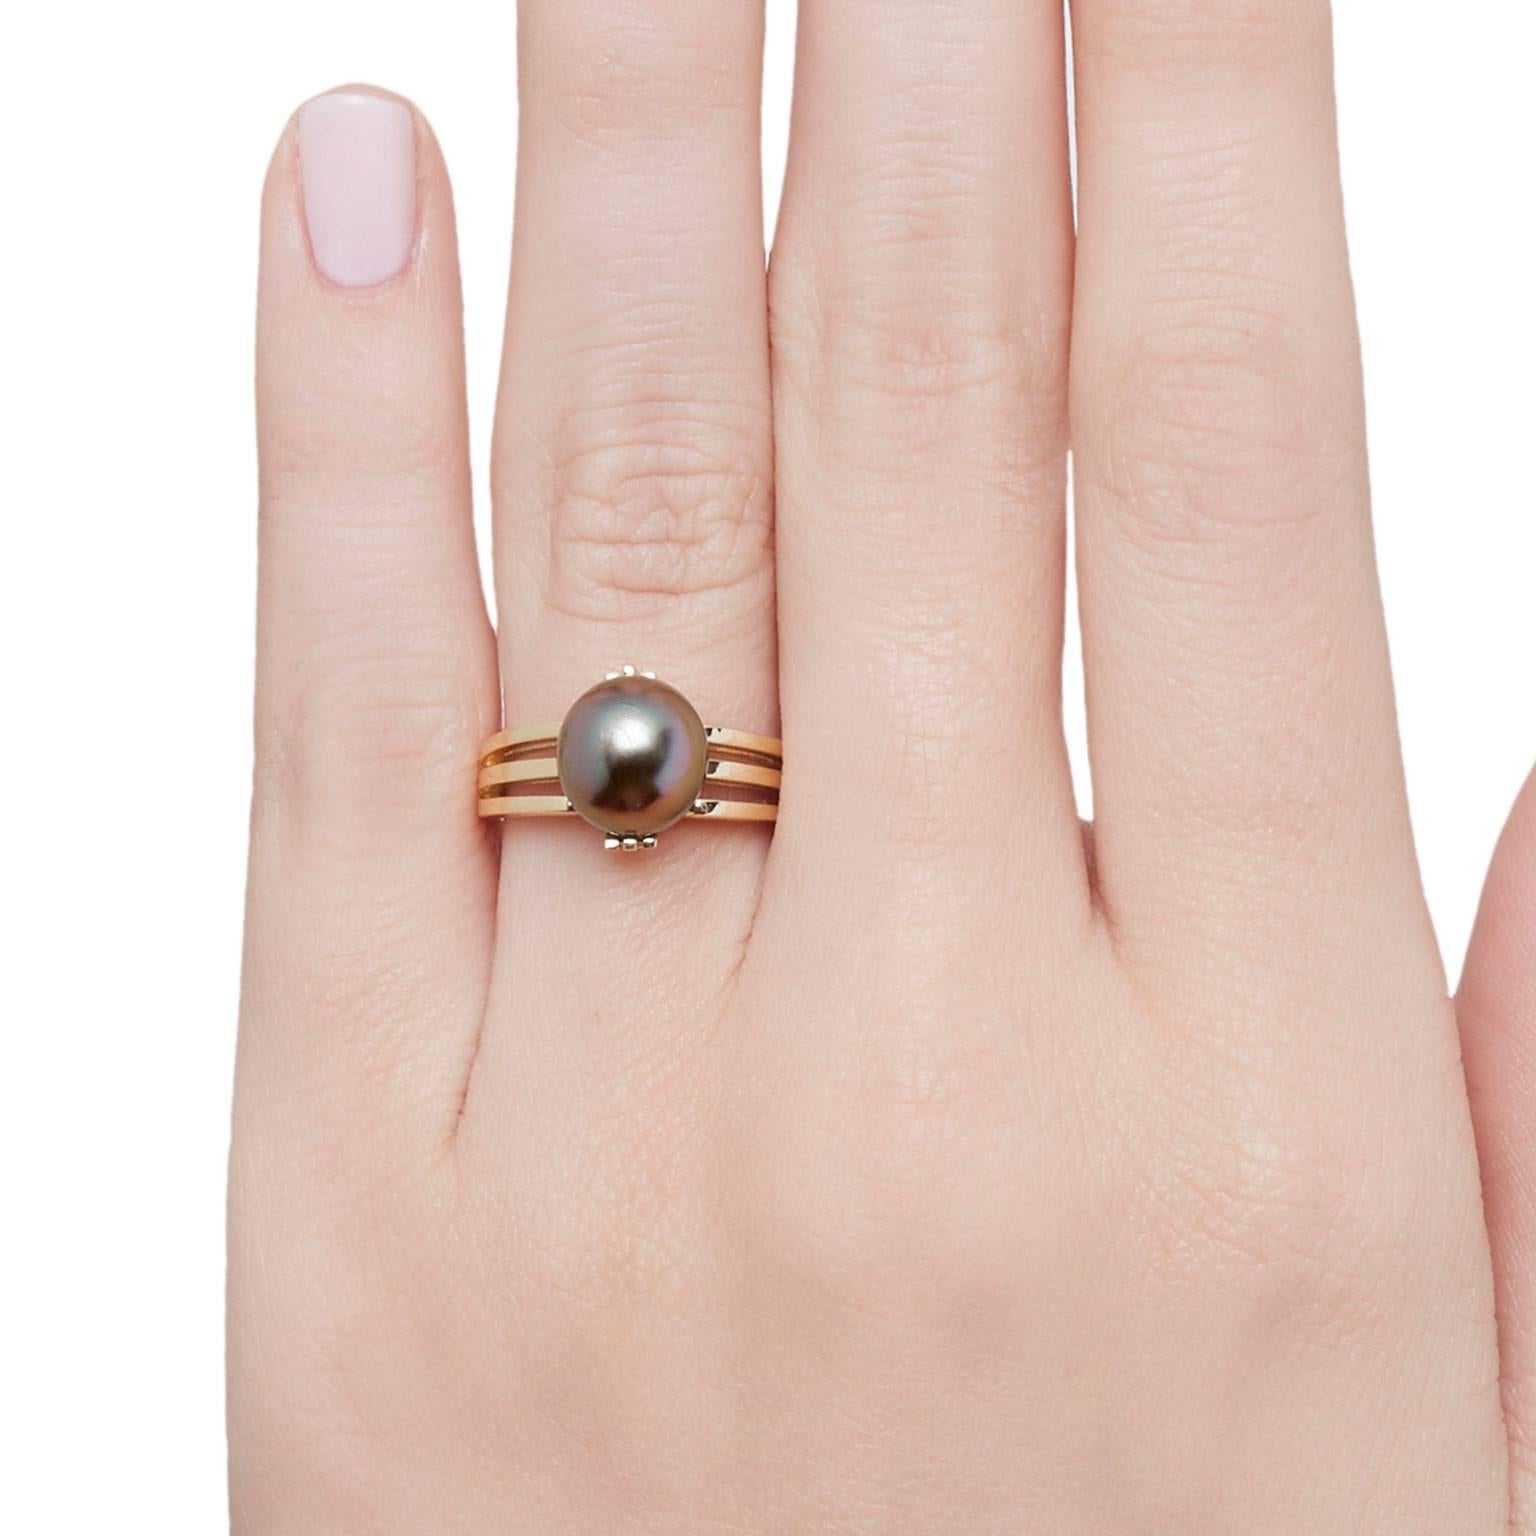 Inspired by an old world globe, this elegantly set Globe Ring from Cushla Whiting's Metropolis Collection, holds in place a beautiful Tahitian black pearl. 

The GLOBE ring is made in 18 carat gold holding a Tahitian black pearl.

One ring in stock,